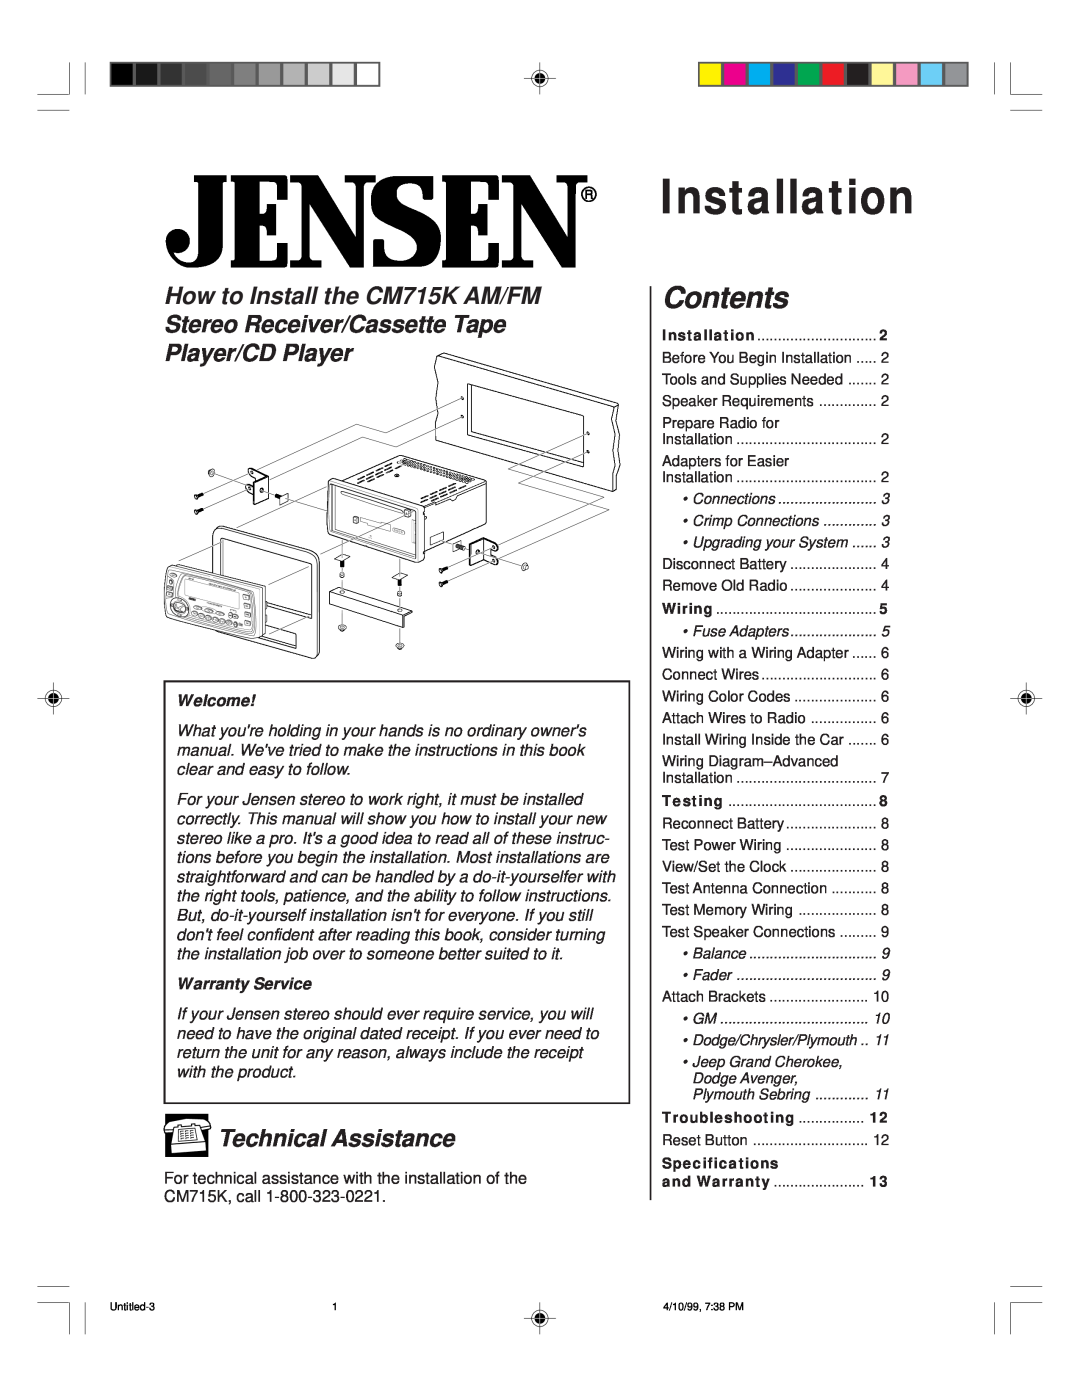 Jensen CM715K specifications Contents, Technical Assistance, Welcome, Warranty Service, Installation 